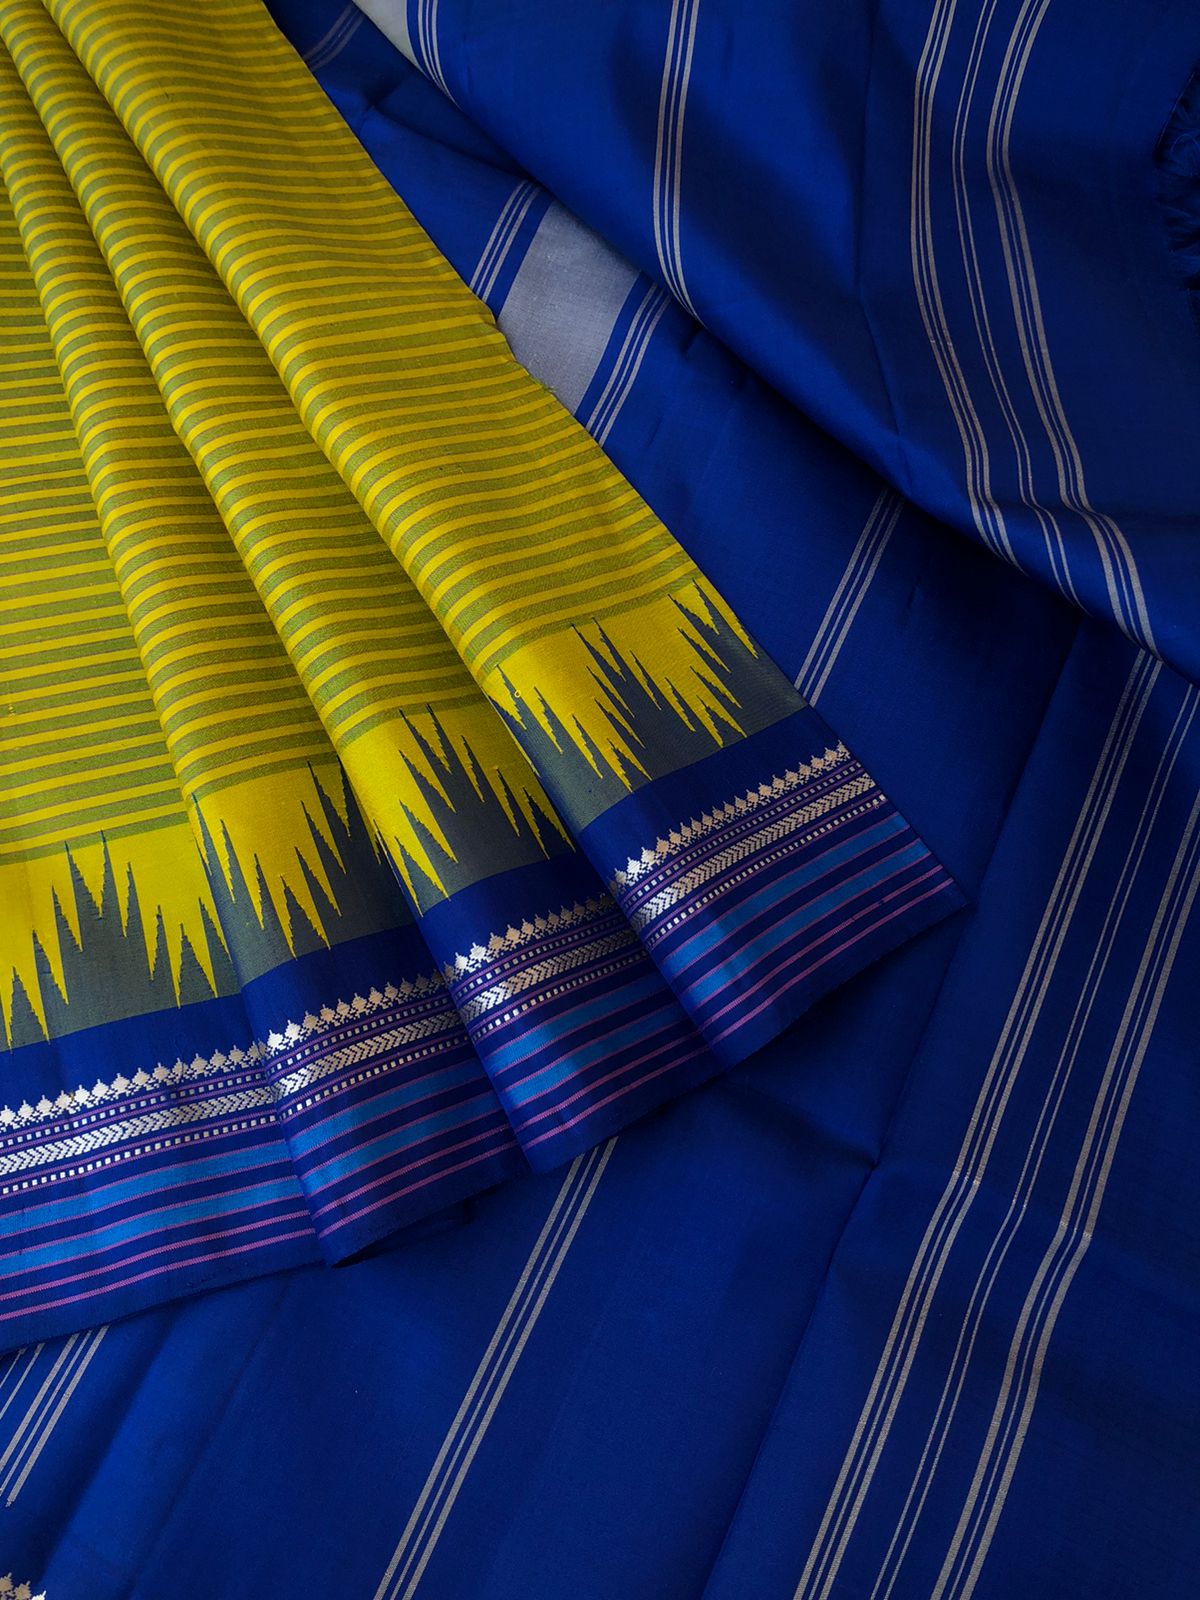 Korvai Connection on Kanchivaram - mustard mixed green oosi valapoo stripes woven body with ms blue pallu and blouse